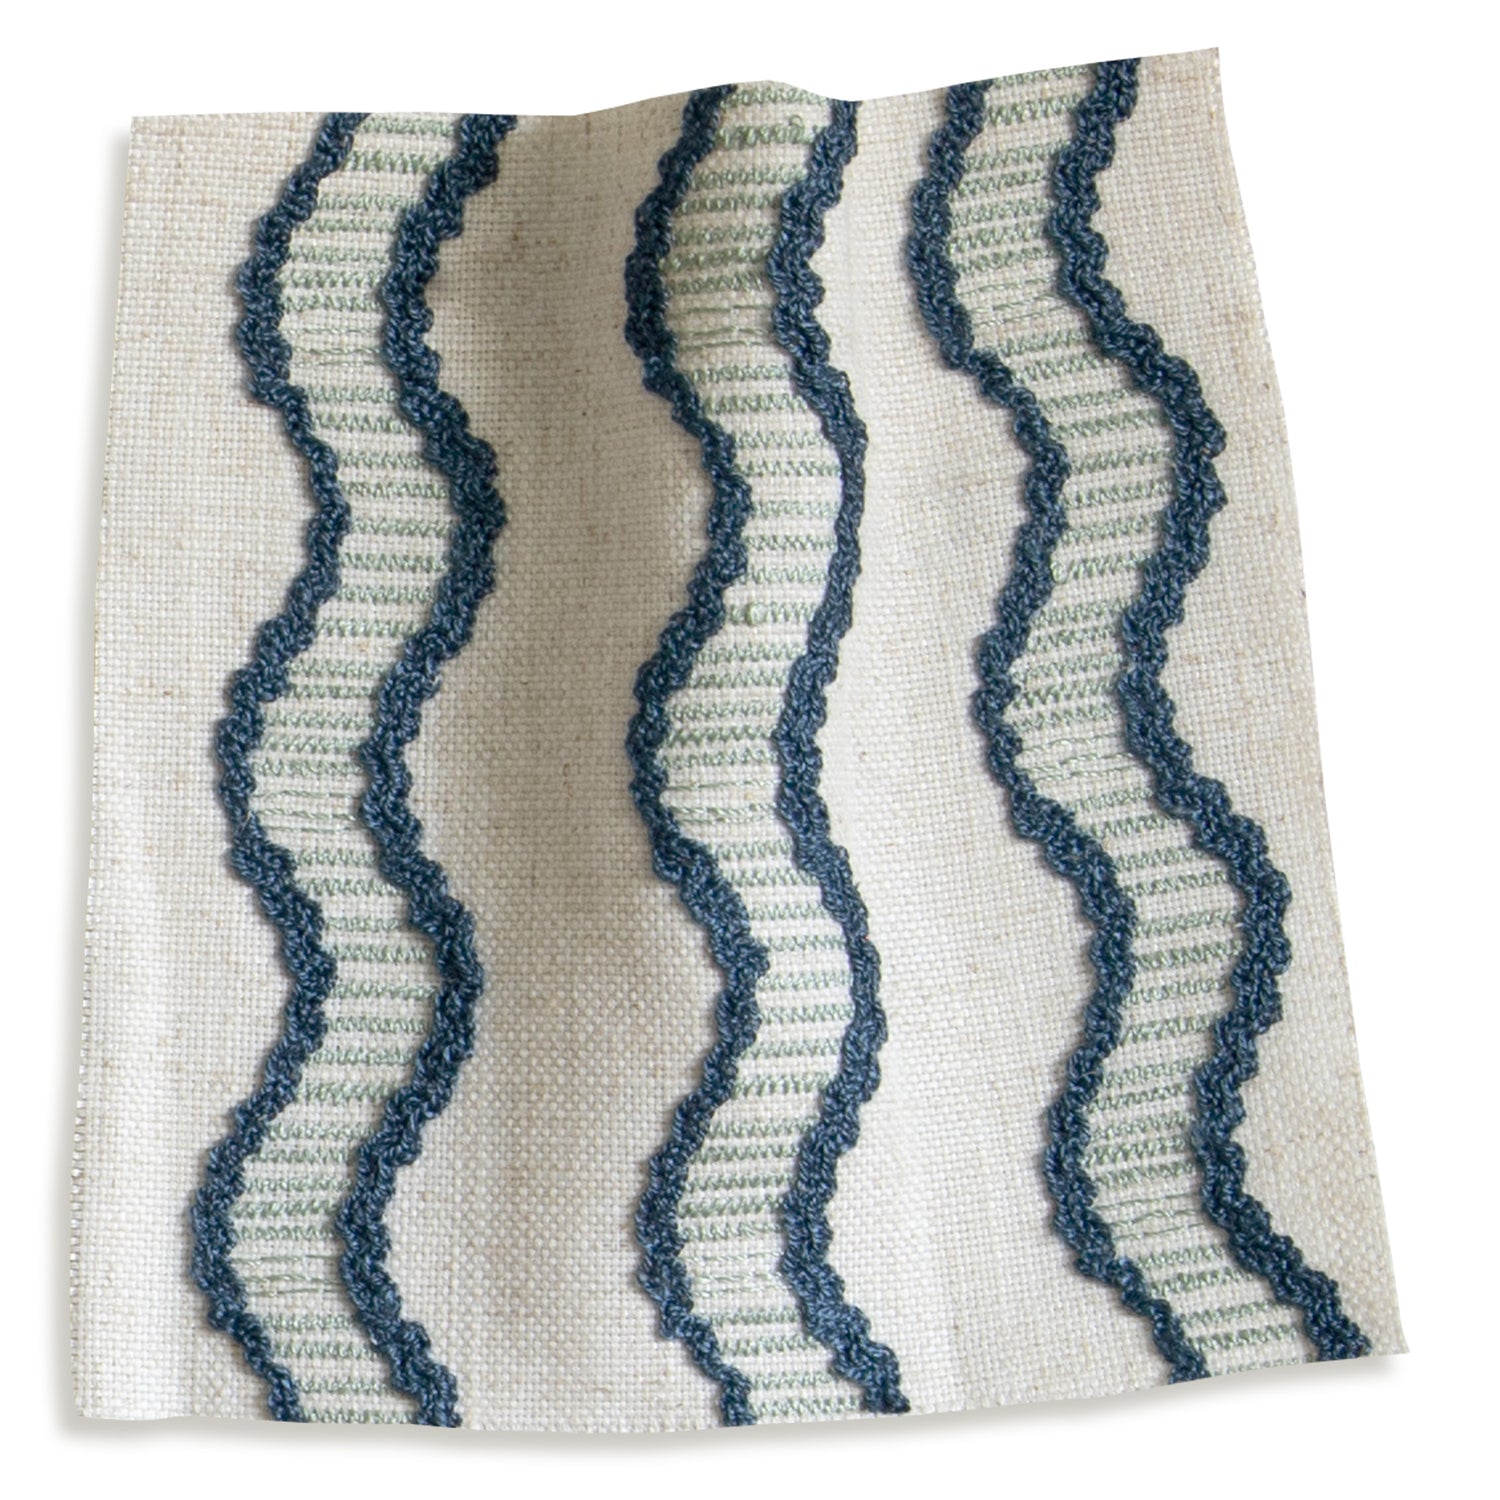 embroidered cream fabric with wavy blue stripes swatch